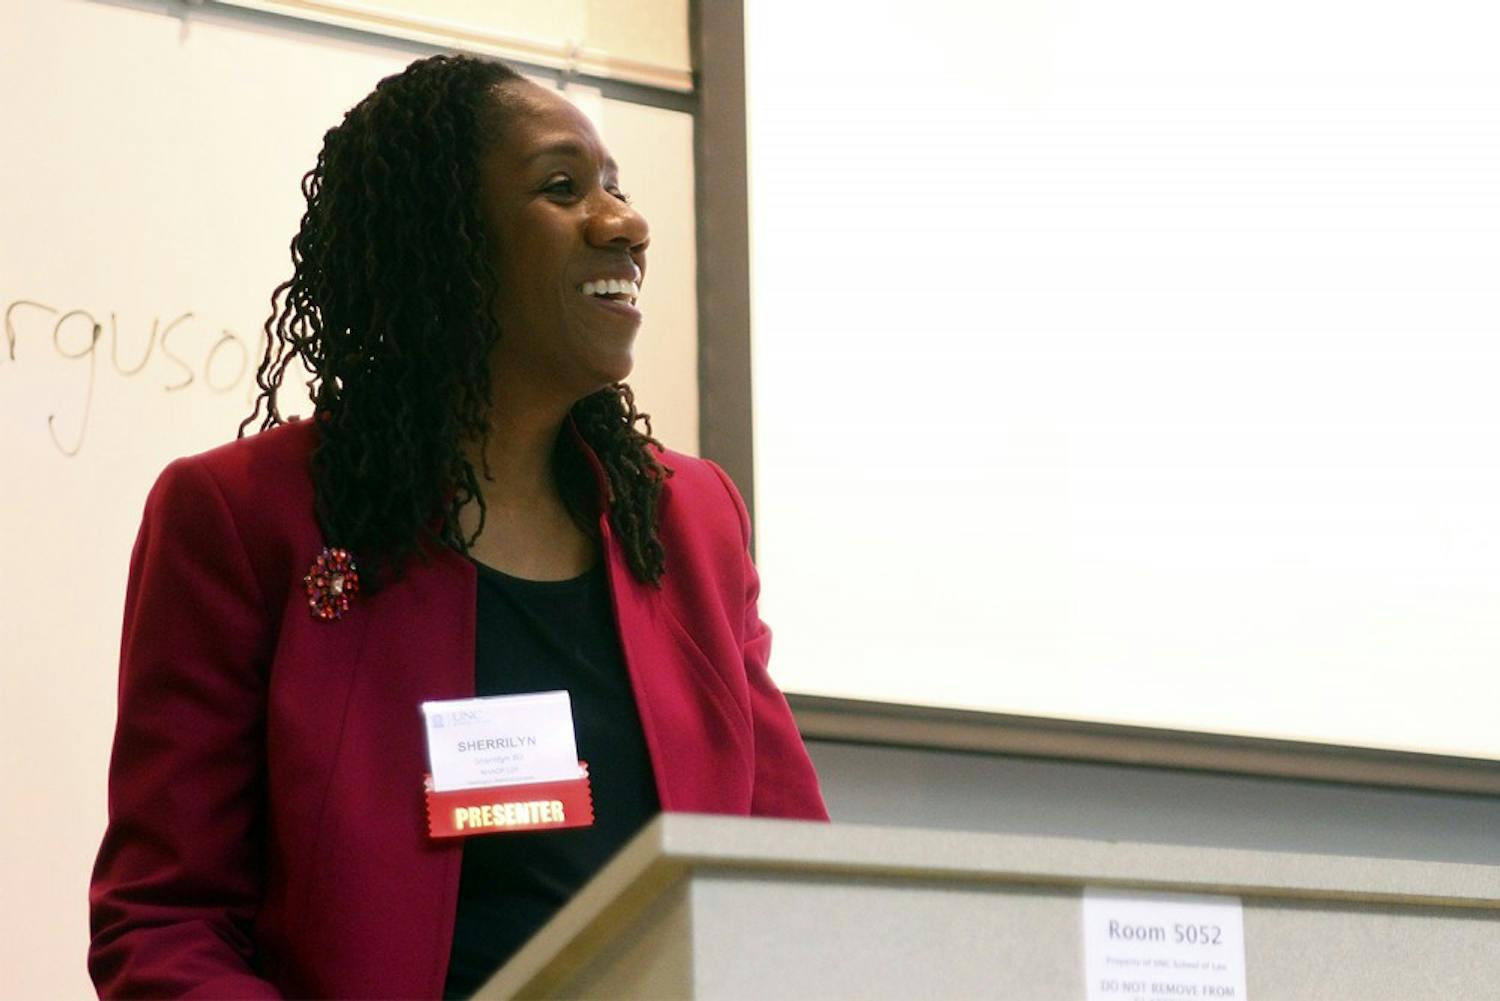 Sherrilyn Ifill, President and Director-Counsel of the NAACP Legal Defense Fund, speaks at a panel discussion, Police Violence in the Wake of Ferguson and Staten Island, at the UNC School of Law on Friday.